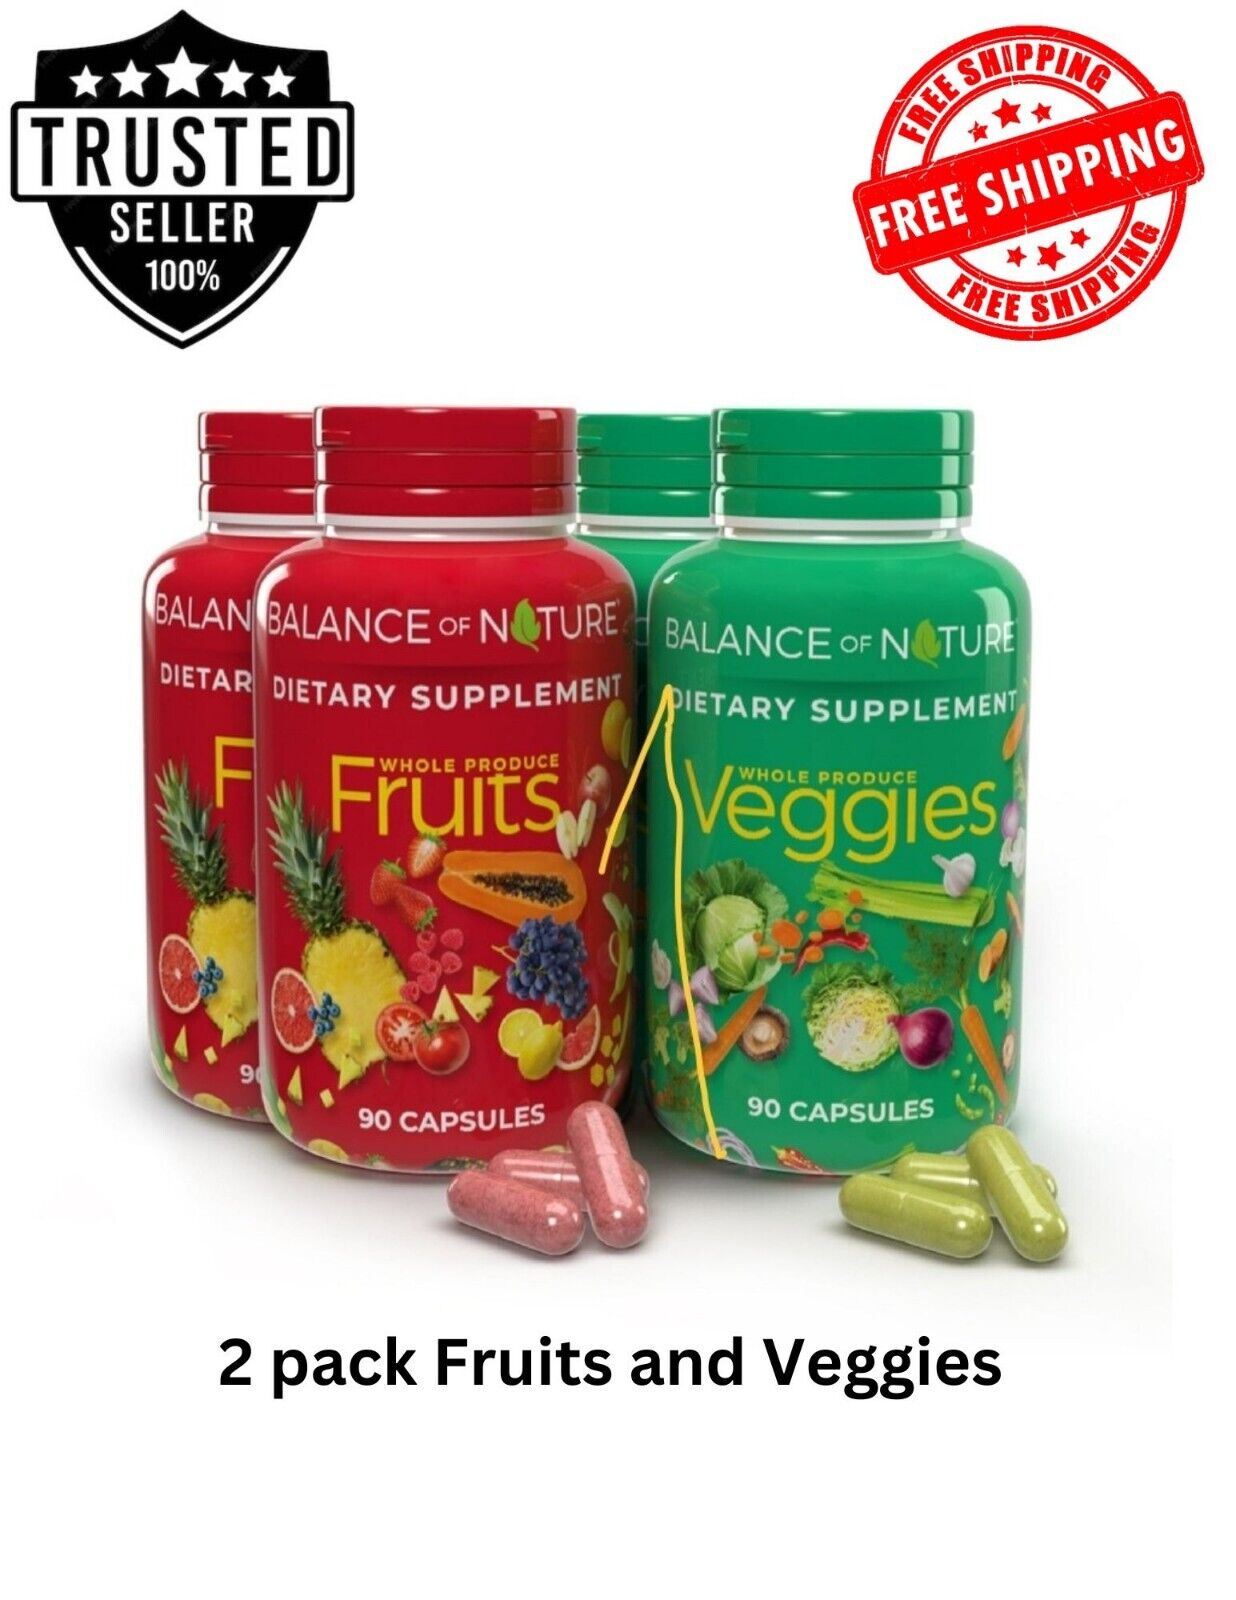 2 Pk Fruits and Veggies Whole Food Supplement. 90 each bottle. Total 360 Caps